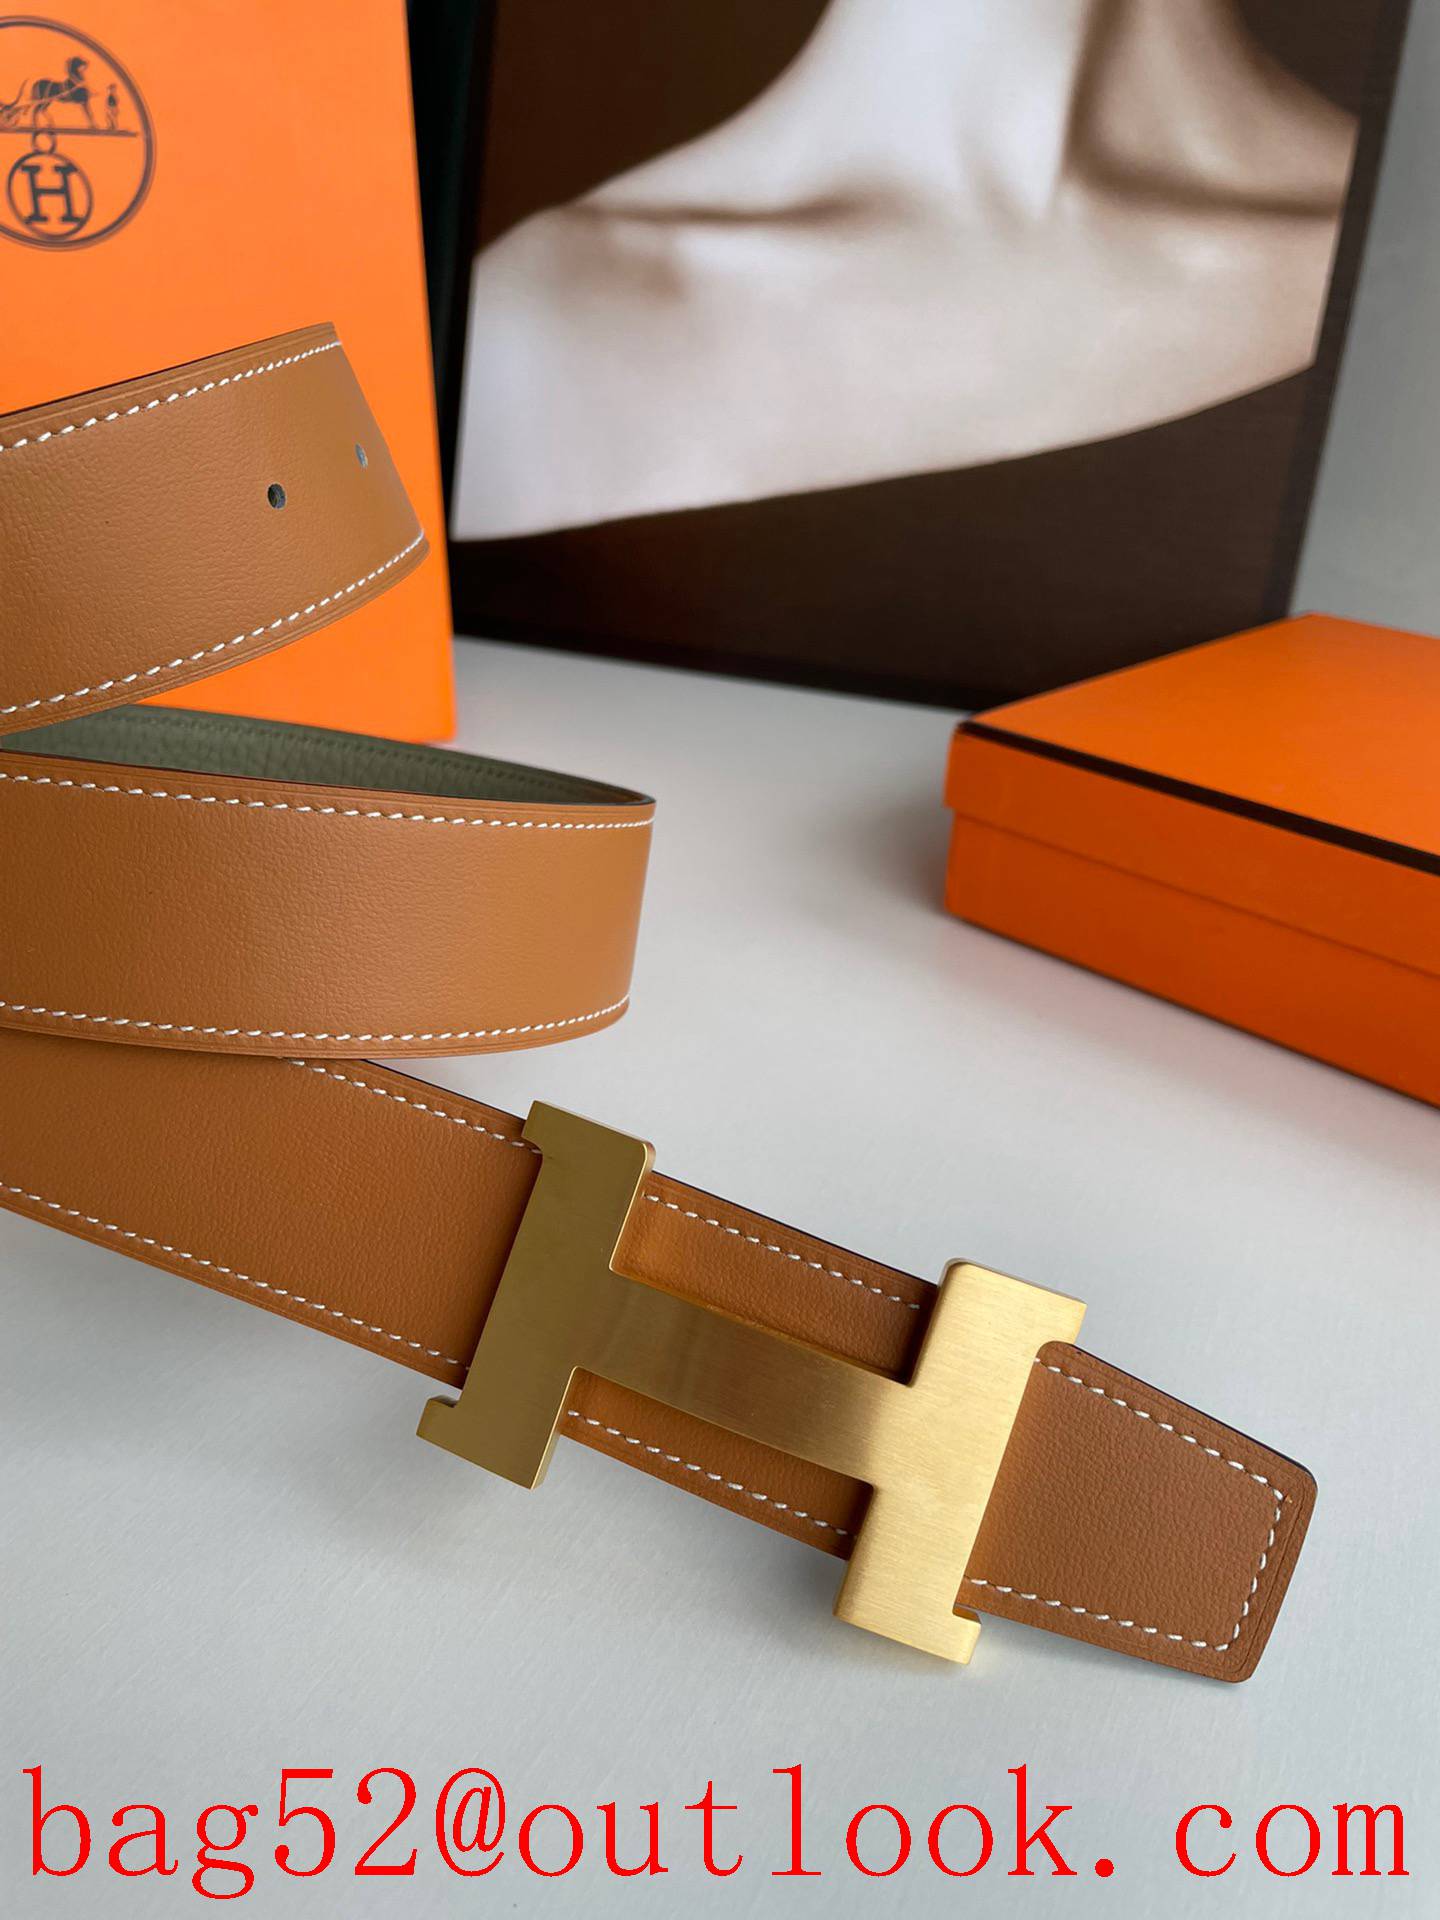 Hermes leather giant trend of 4 color convergence belt